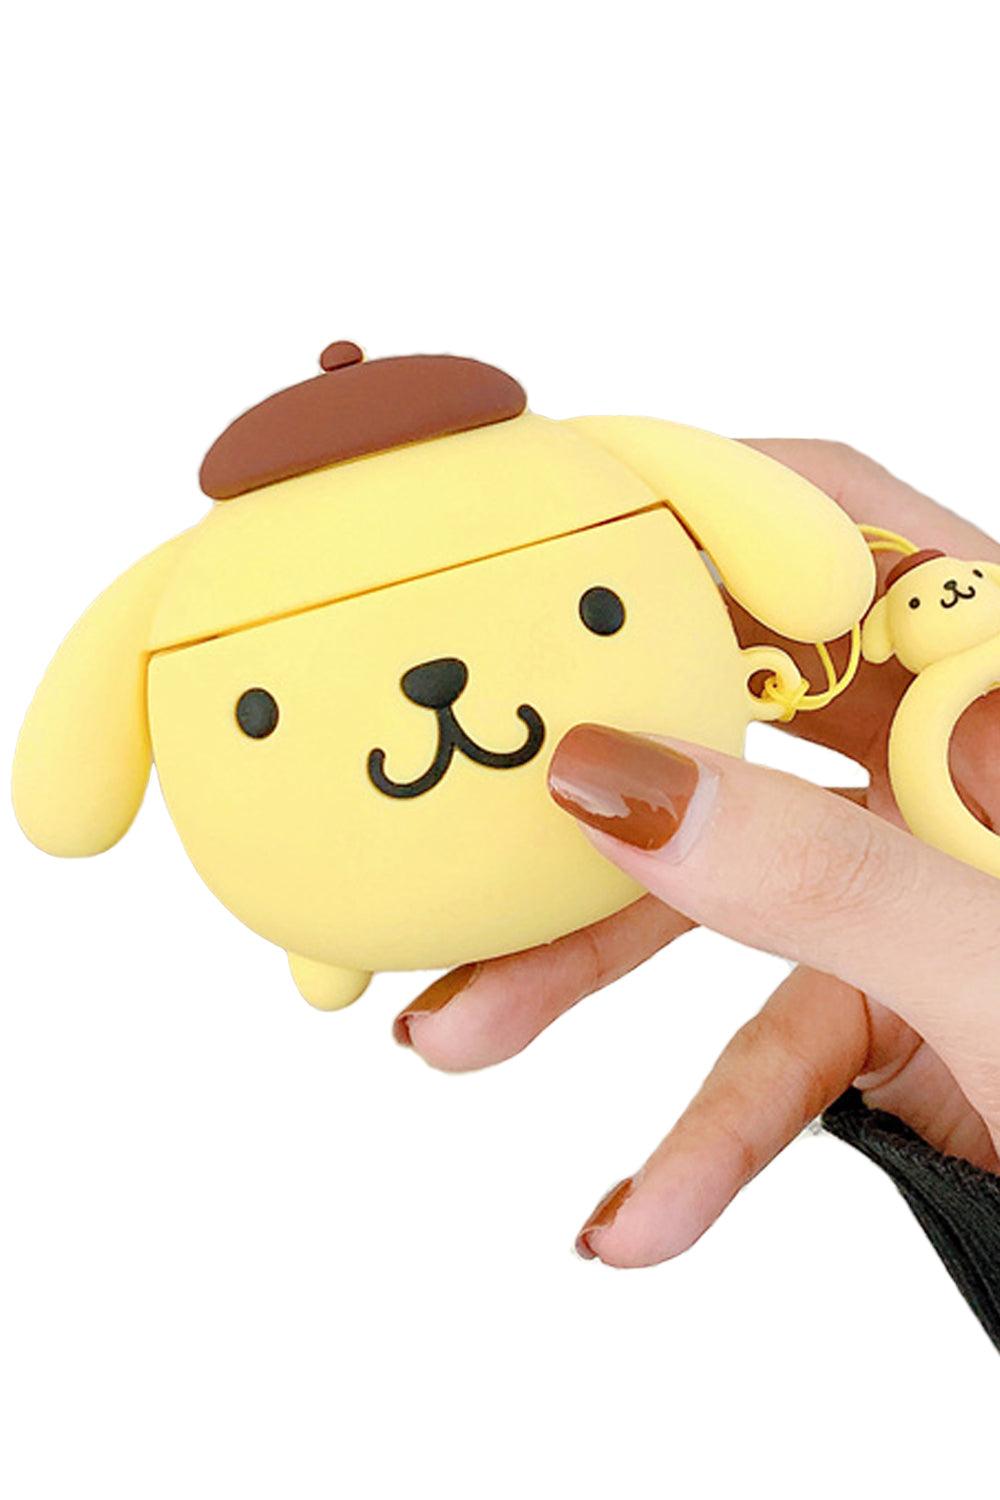 Pompompurin Pudding Dog Airpods Case - Aesthetic Clothes Shop